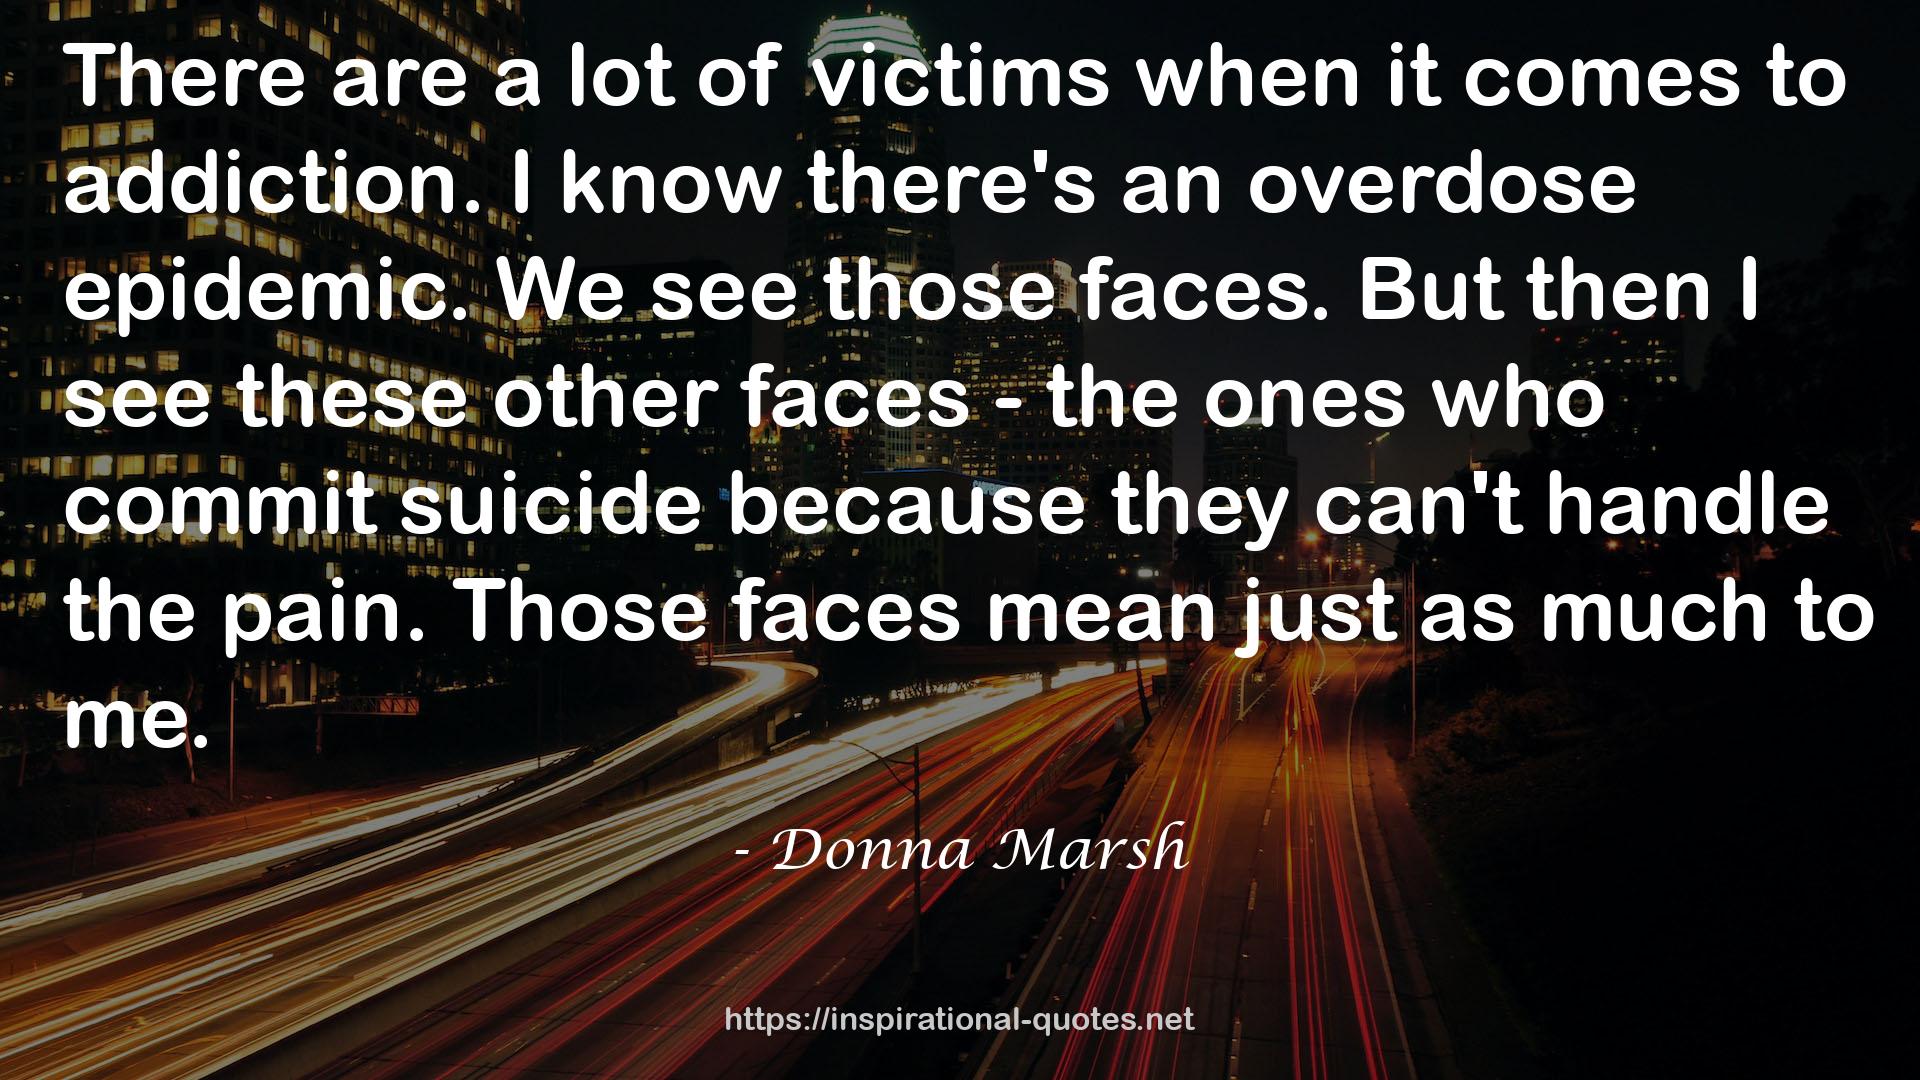 Donna Marsh QUOTES